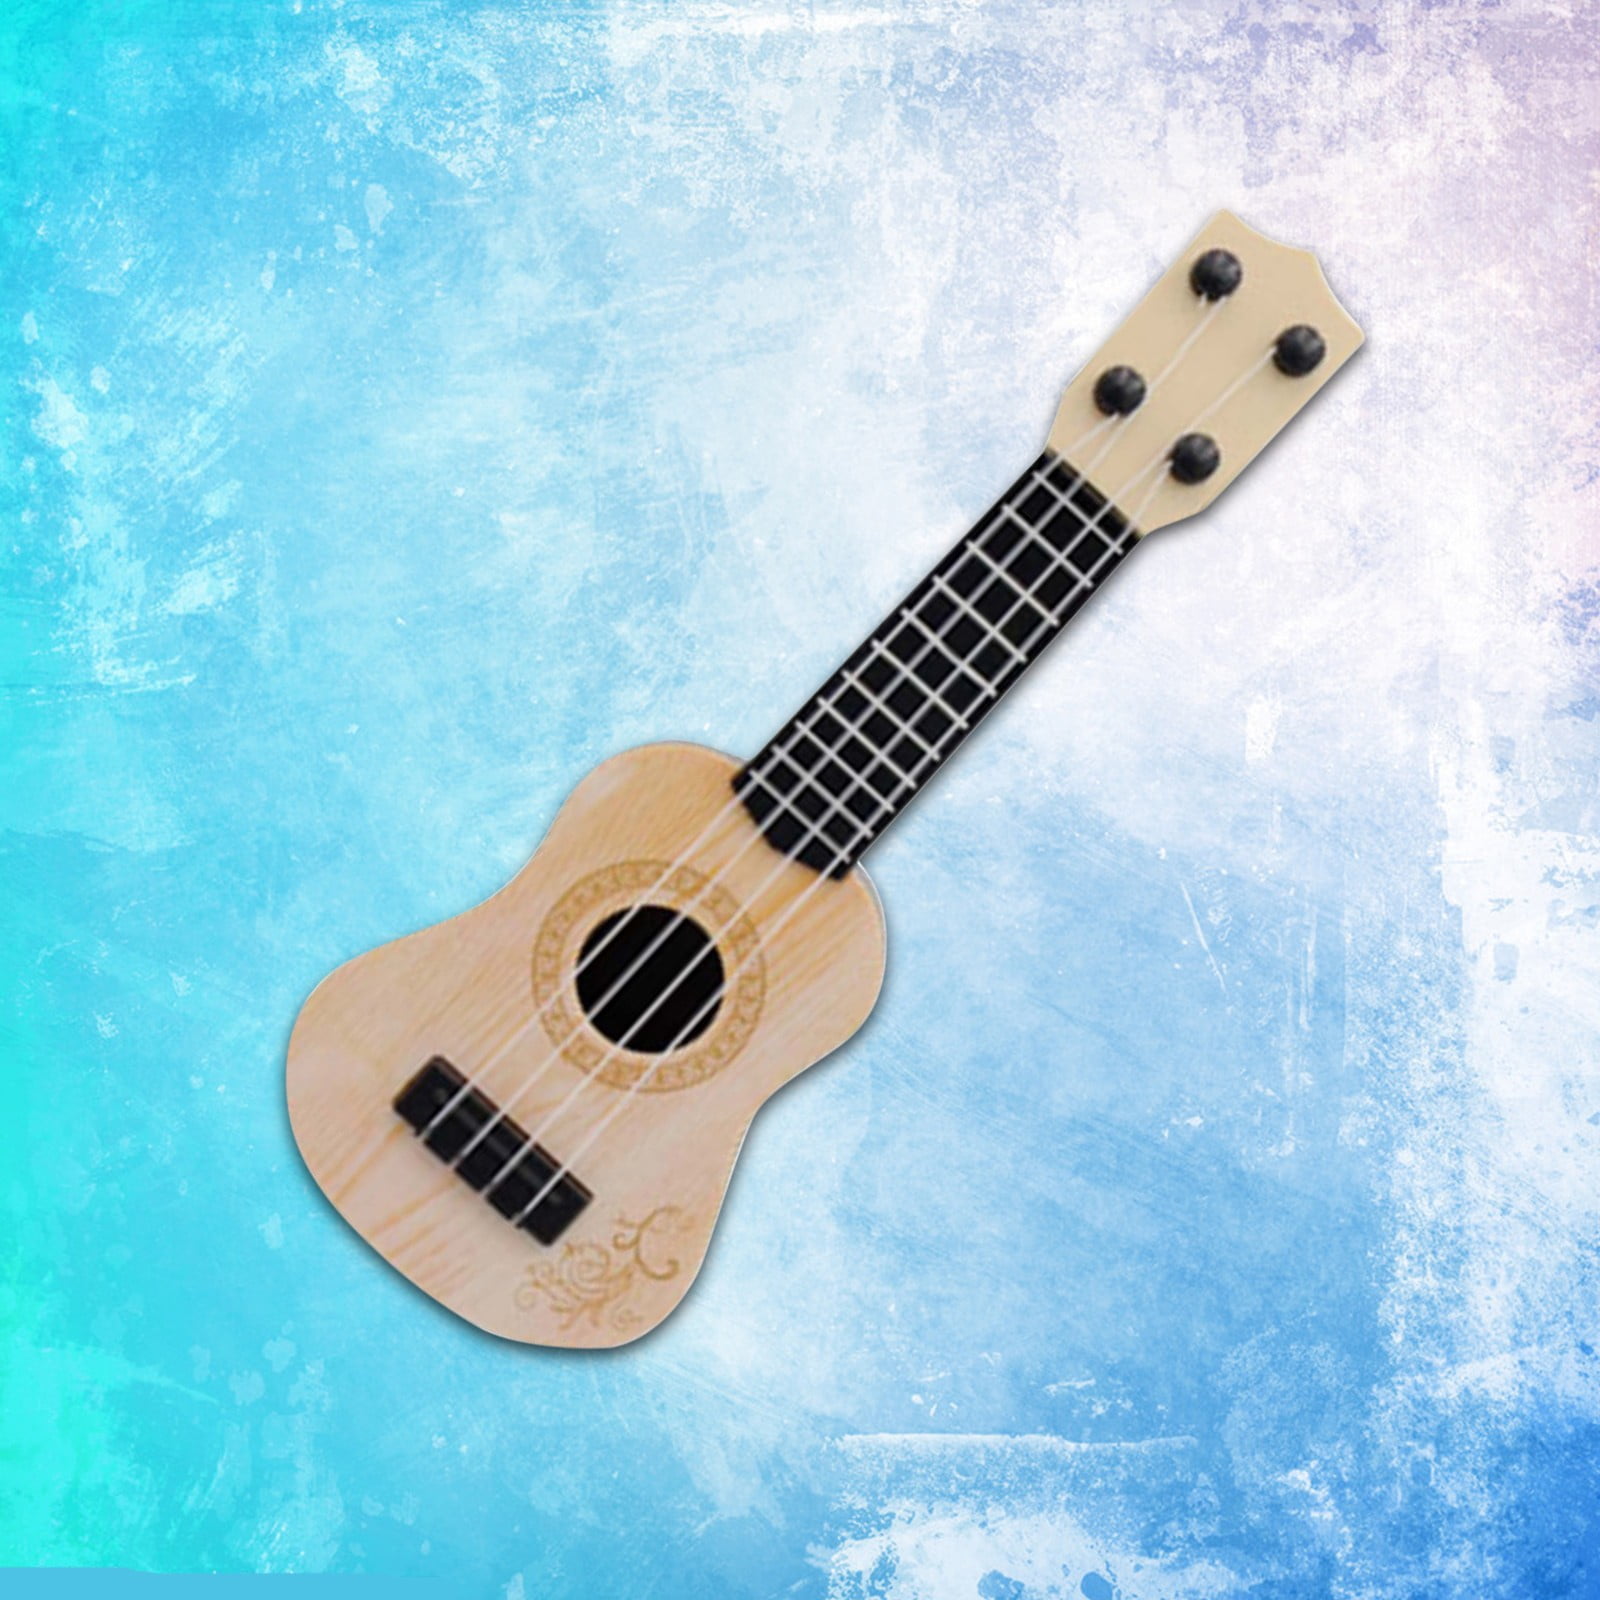 ROFAY 23 Inch Ukulele Toy for Kids Children Musical Instrument Fun Educational Early Learning Toy 4 String Guitar Ukulele with Gift Box for Toddlers 